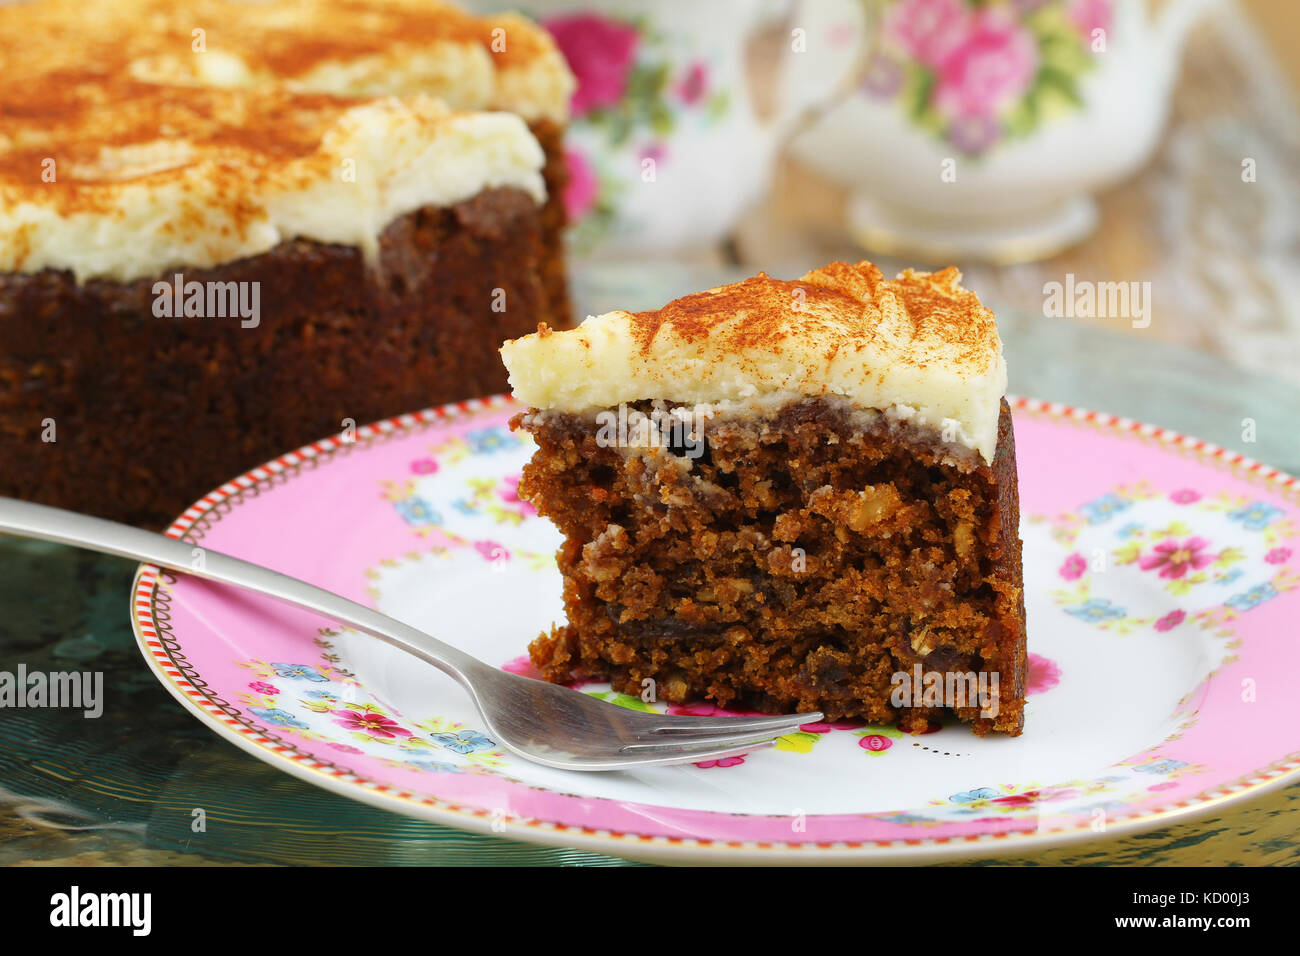 Piece of delicious walnut and carrot cake on colorful plate Stock Photo